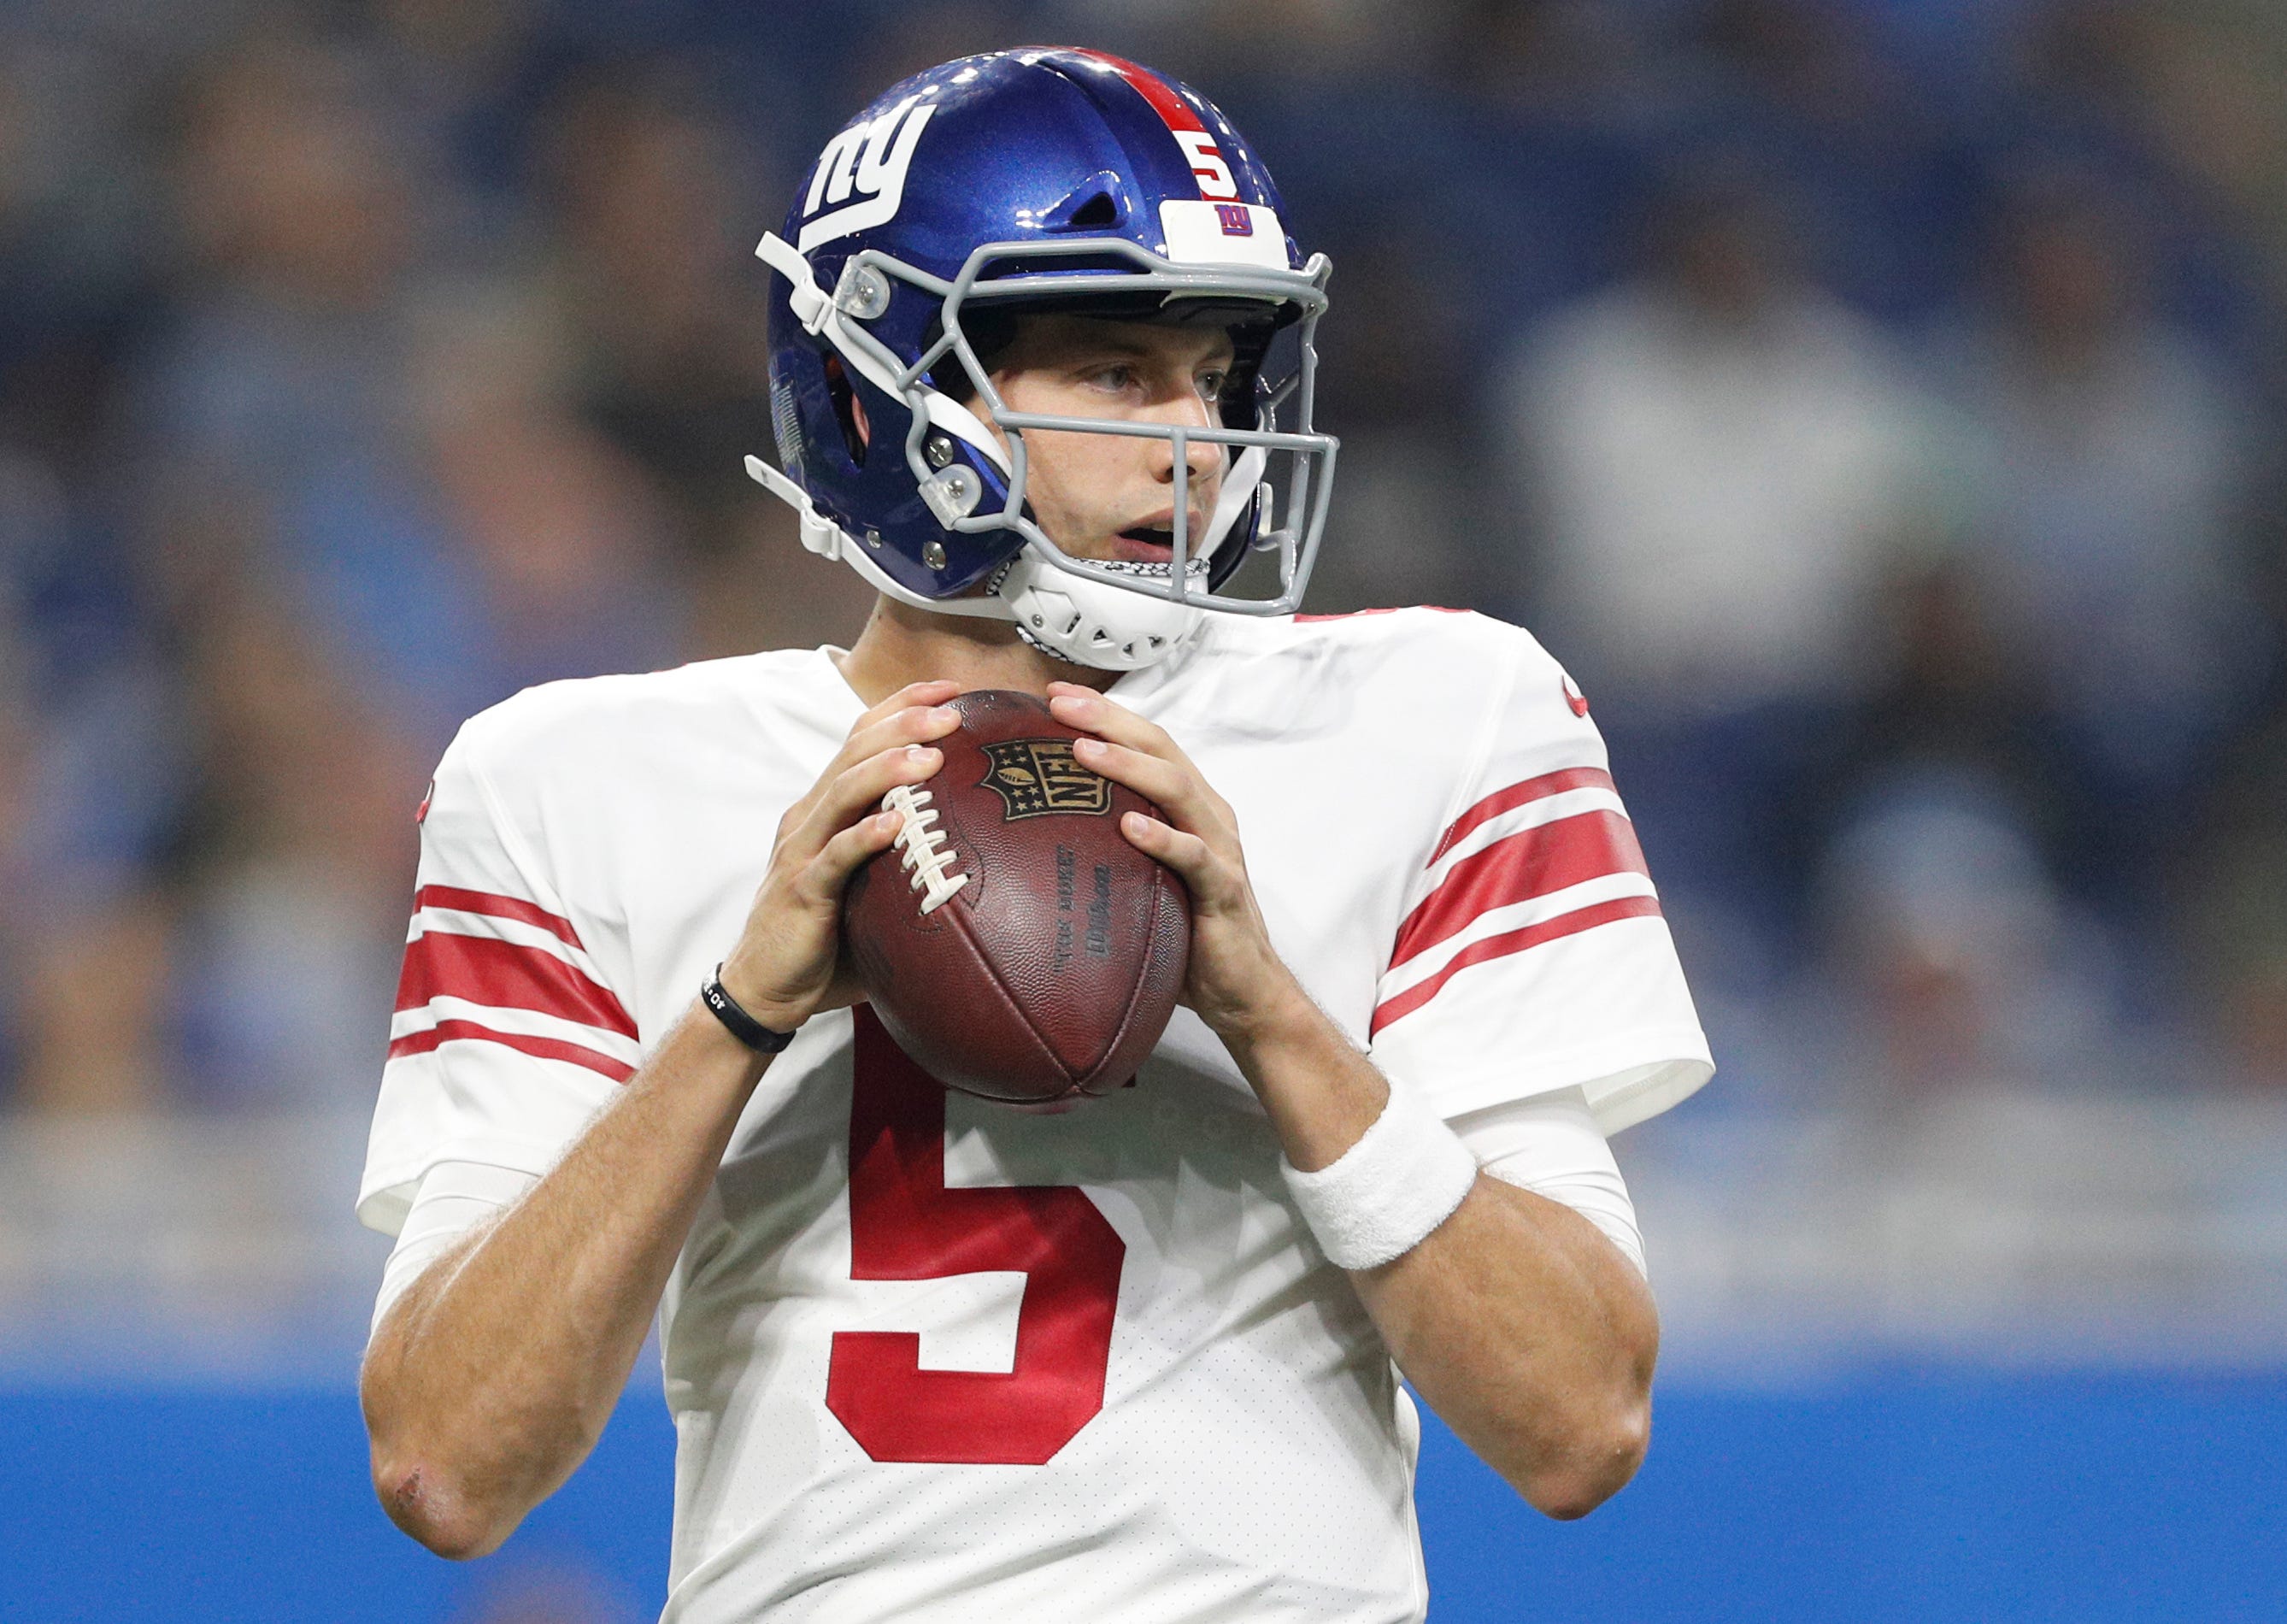 New York Giants waive young QB Davis Webb in shocking move